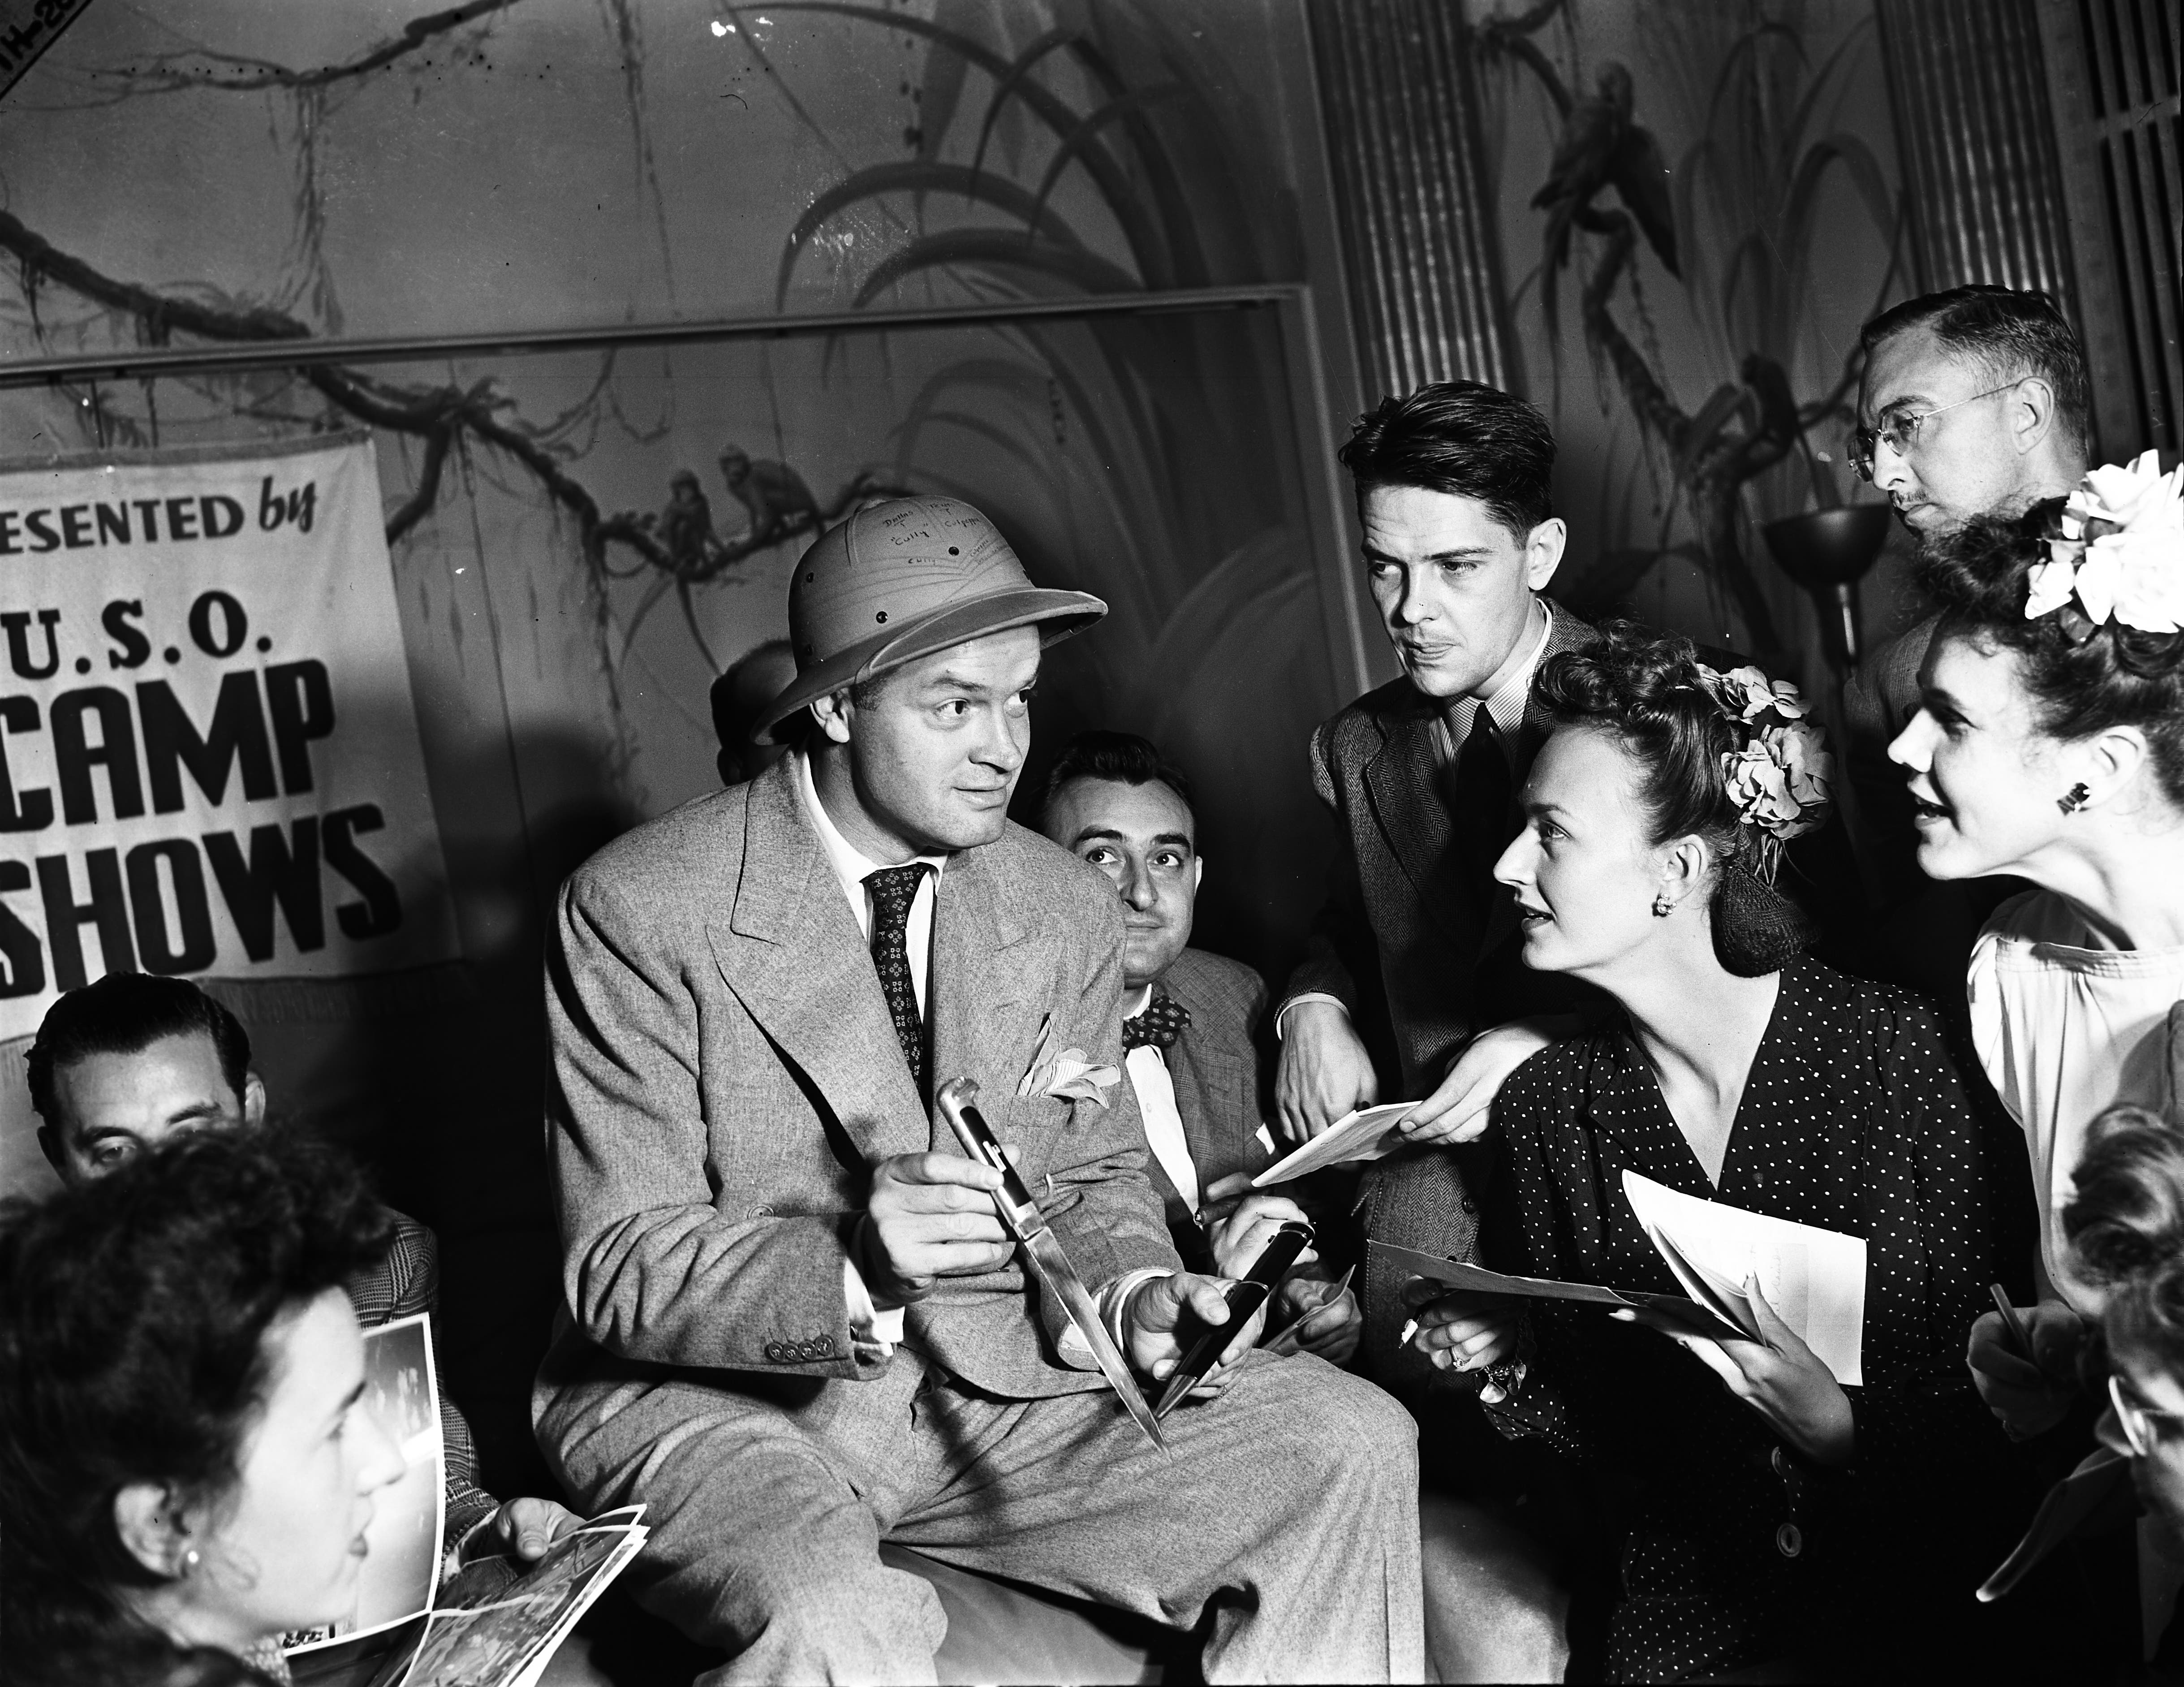 Bob Hope at a USO camp event during WW2 in 1943